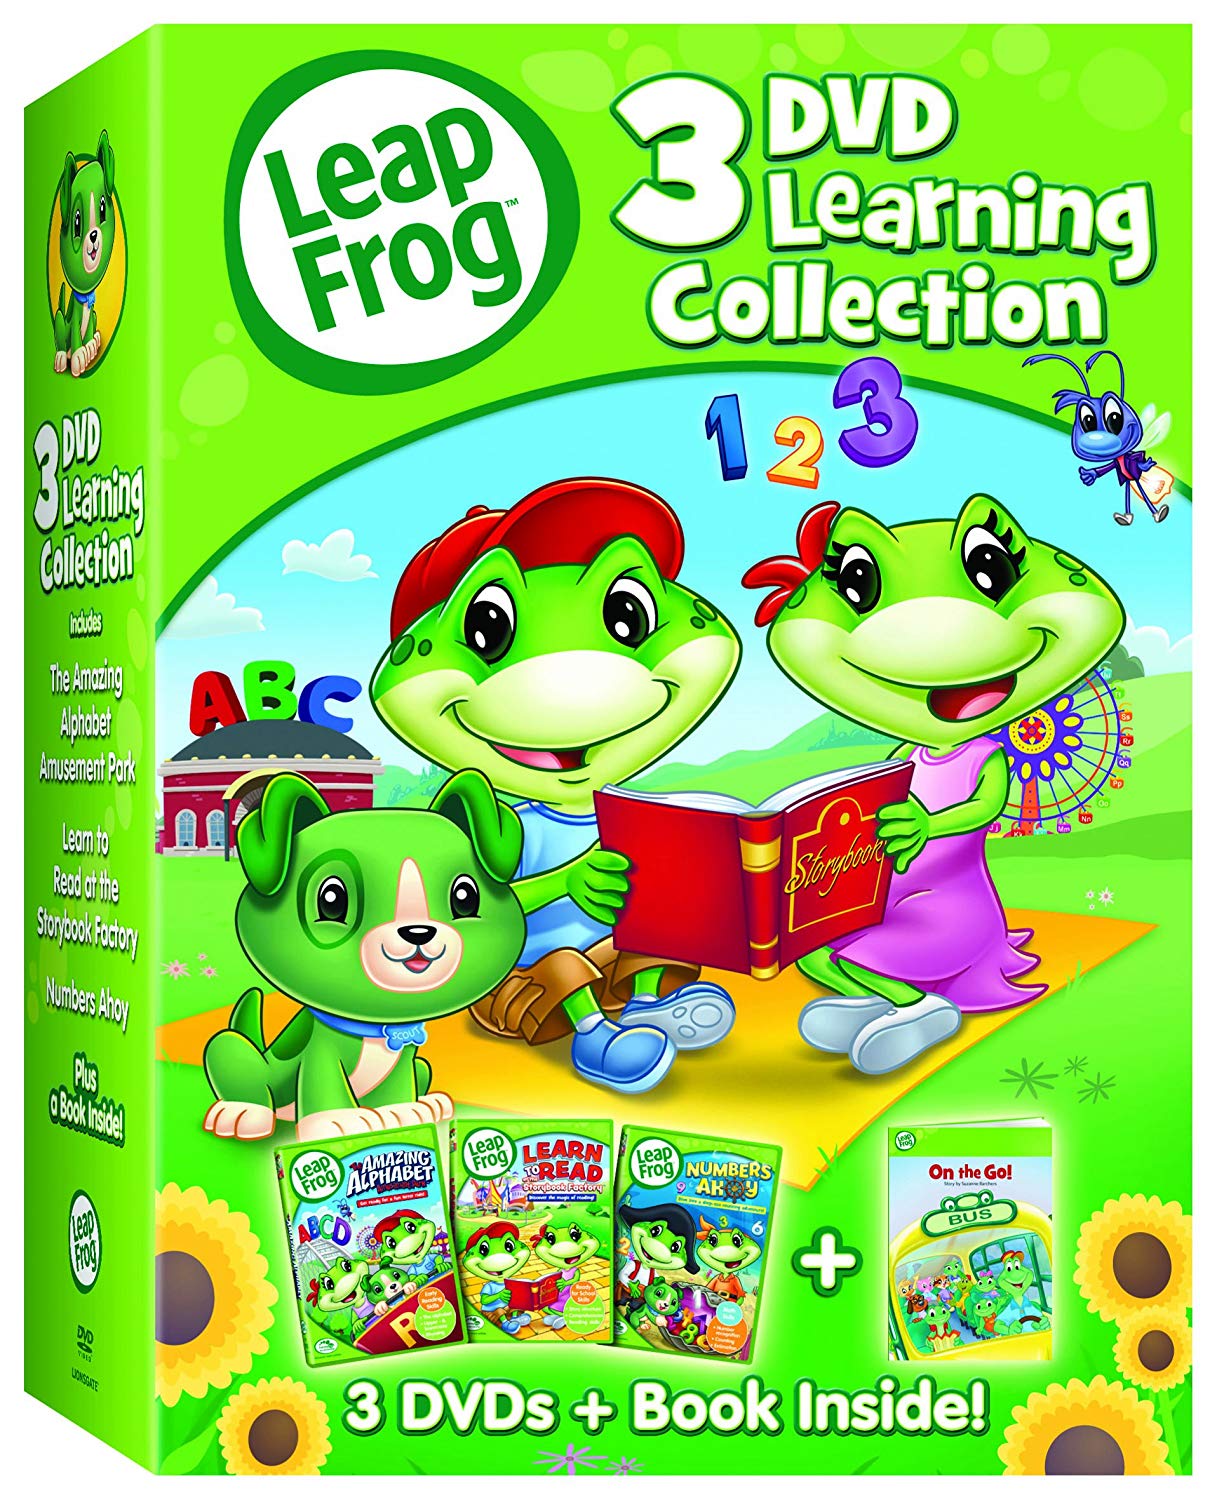 the popular Leapfrog line of educational programs features Professor Quigle...